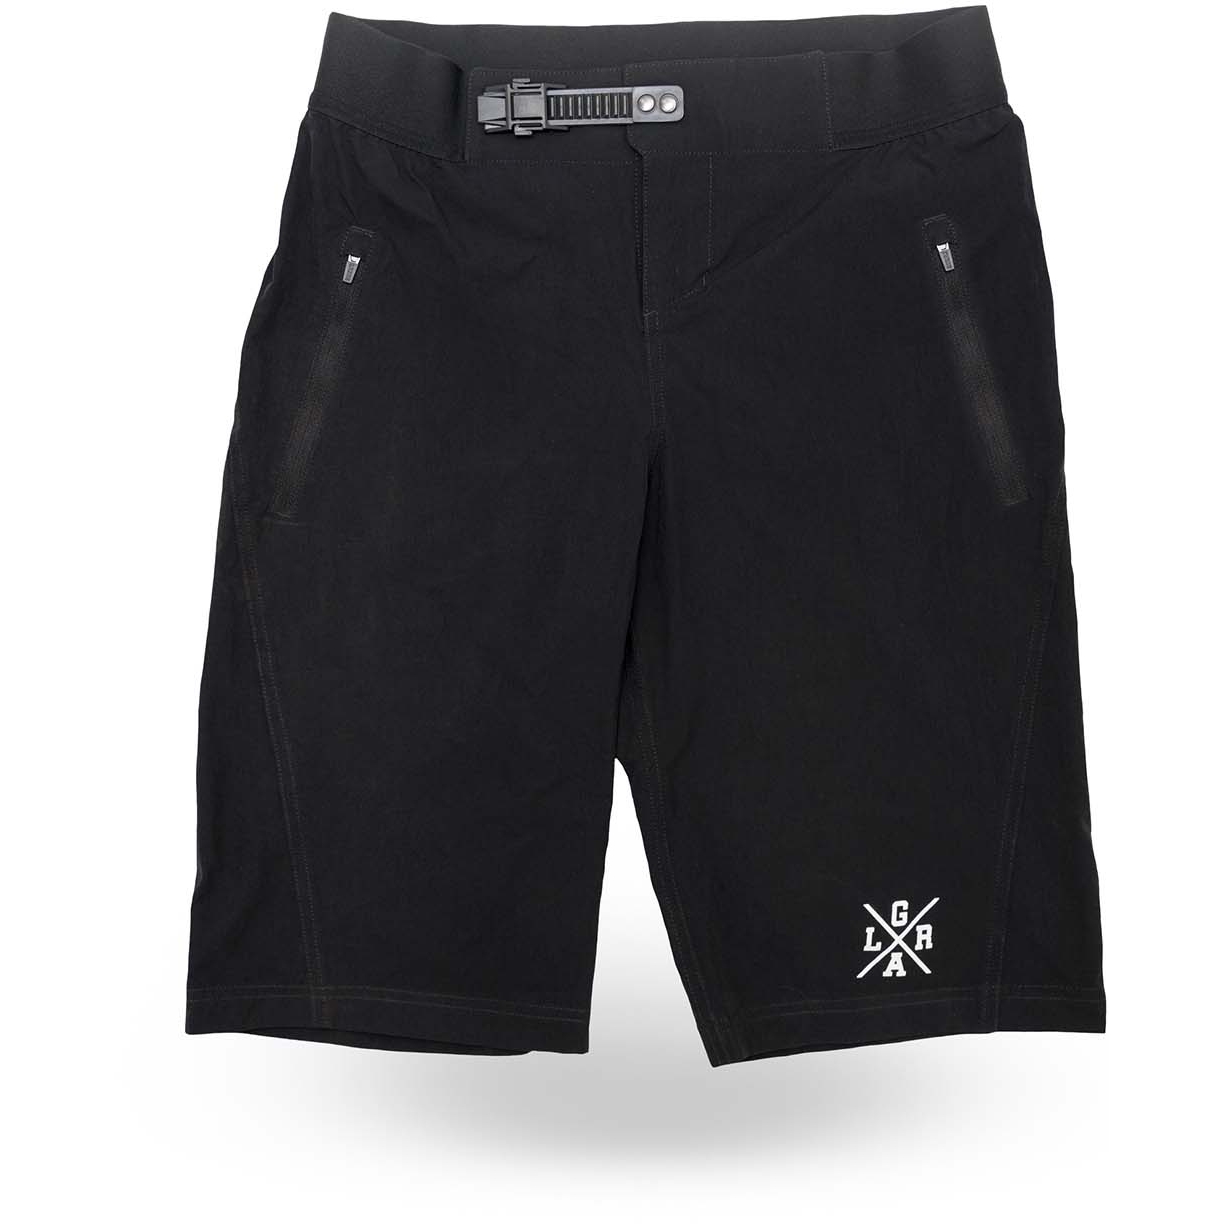 Picture of Loose Riders Basics Technical Shorts - Black